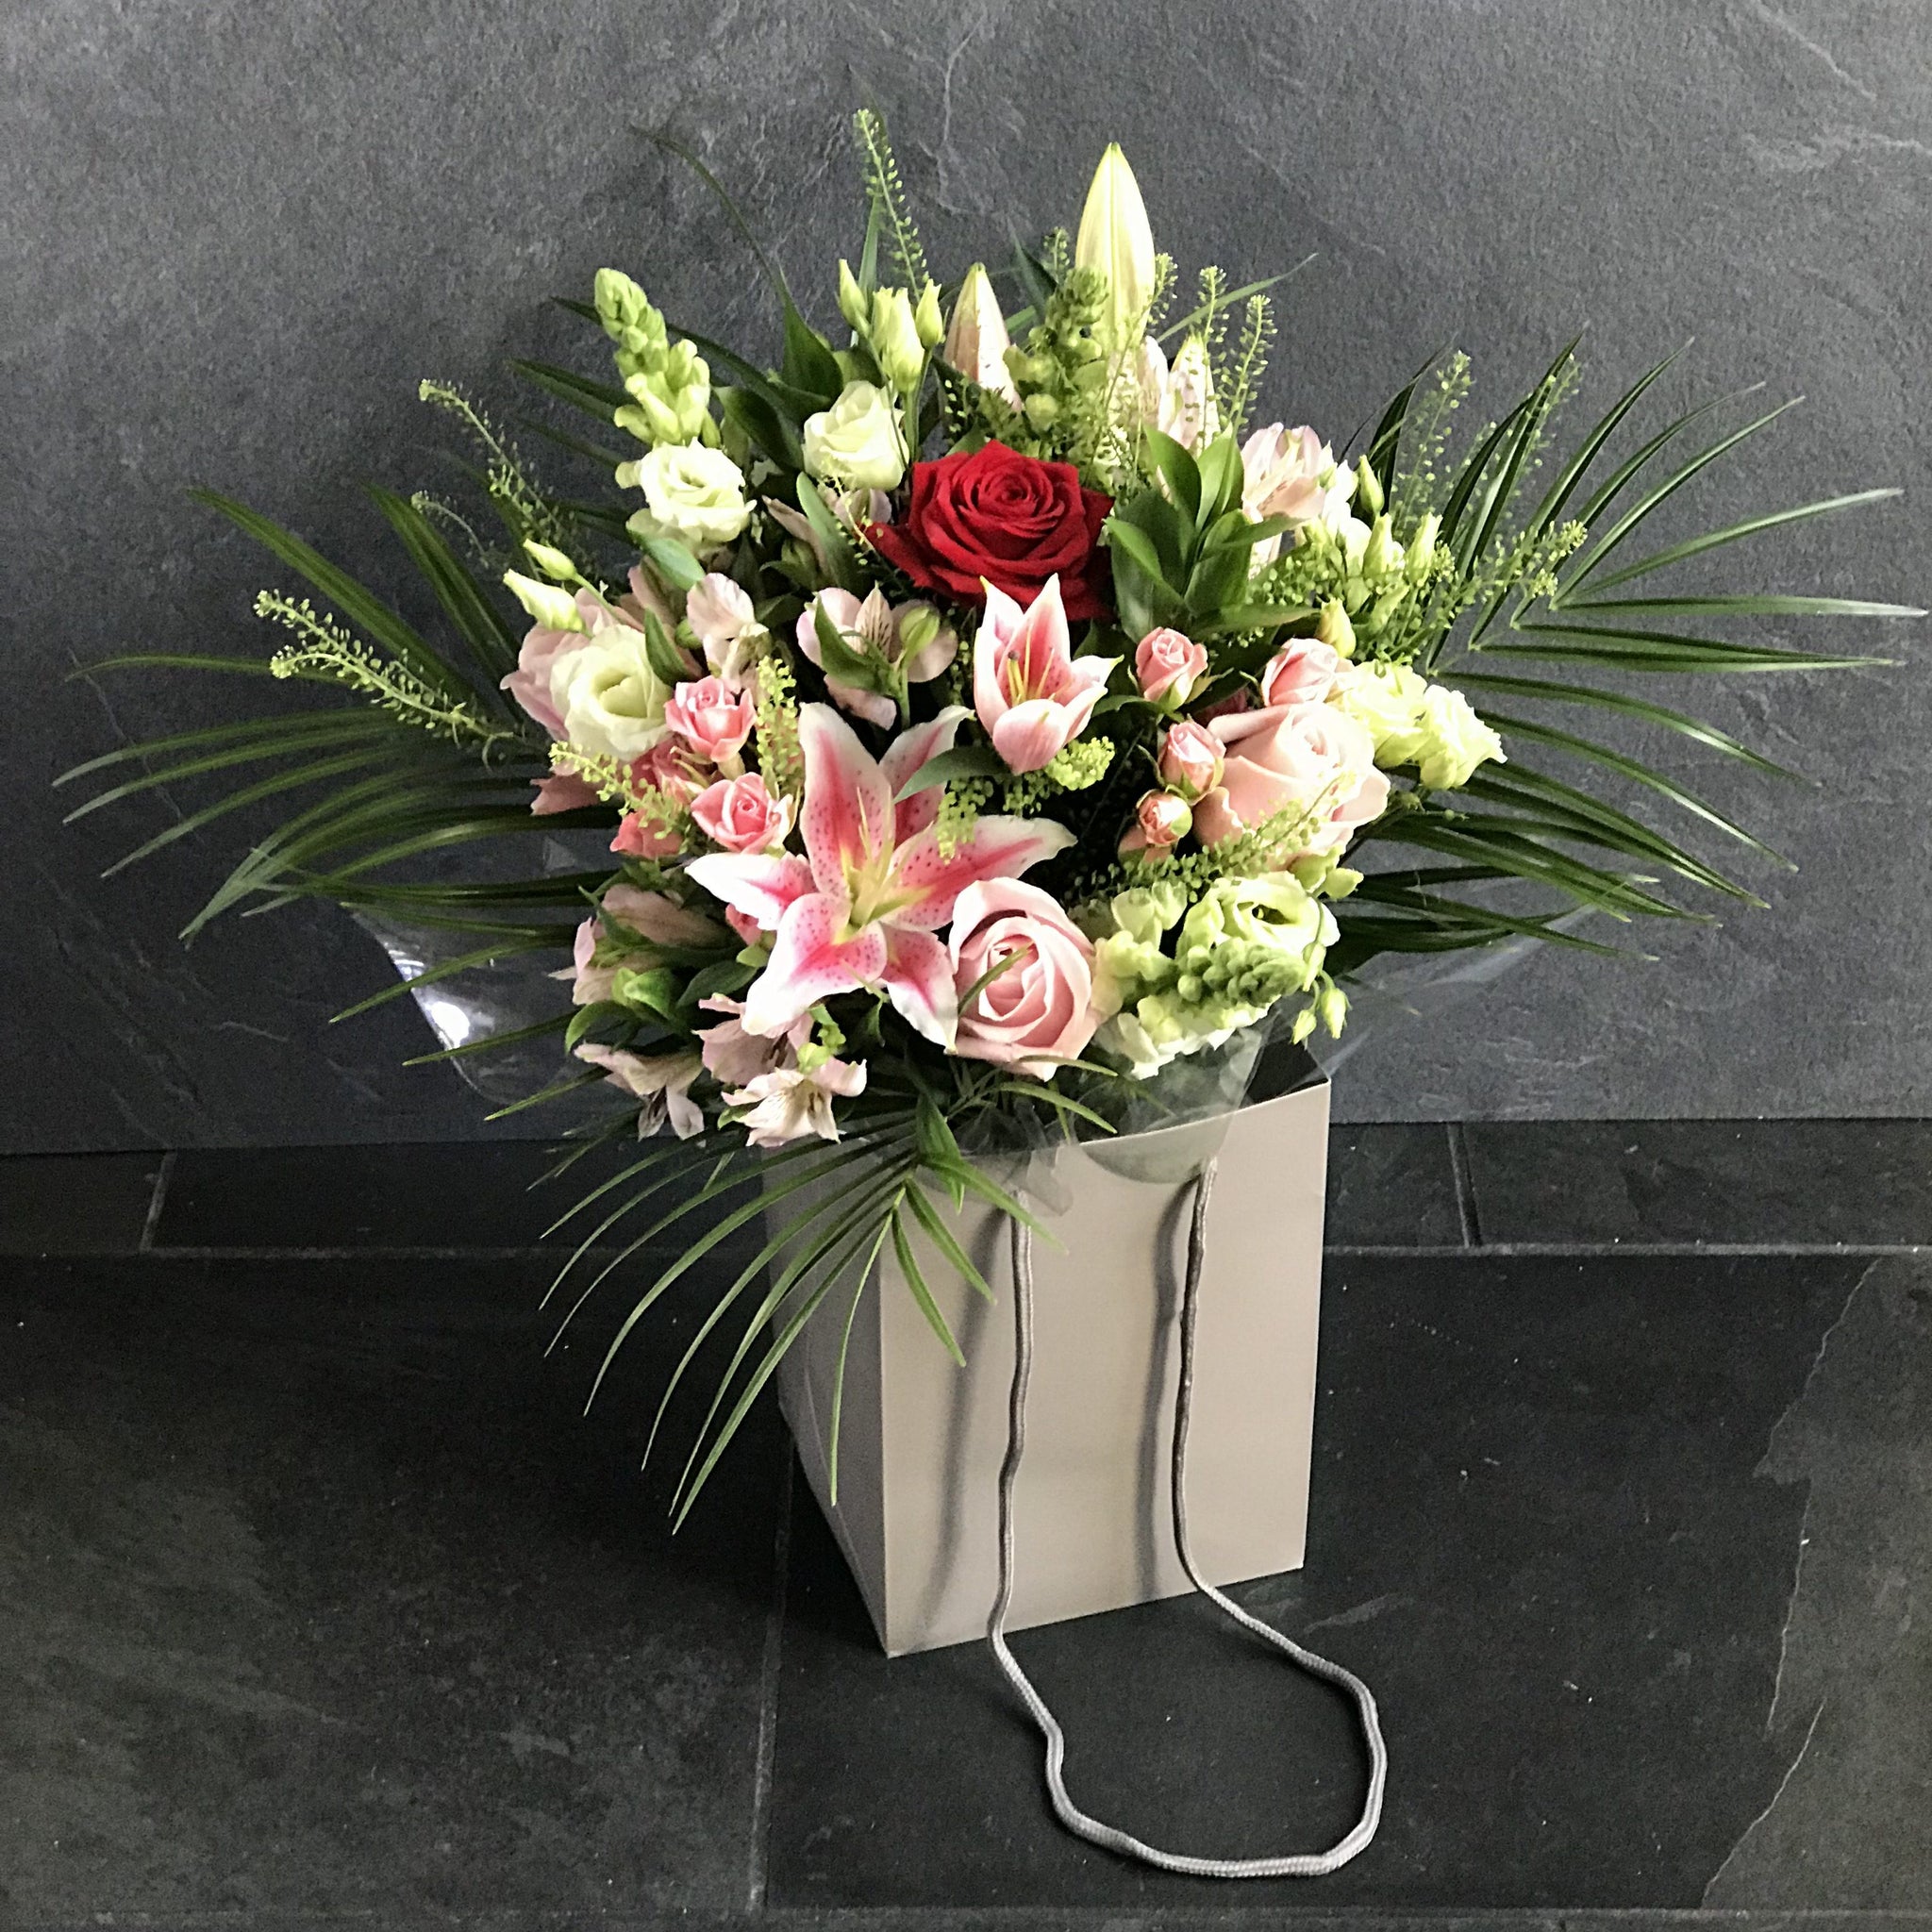 Mixed bag of flowers in oasis with Luxury Red Rose ( if available) in gift bag